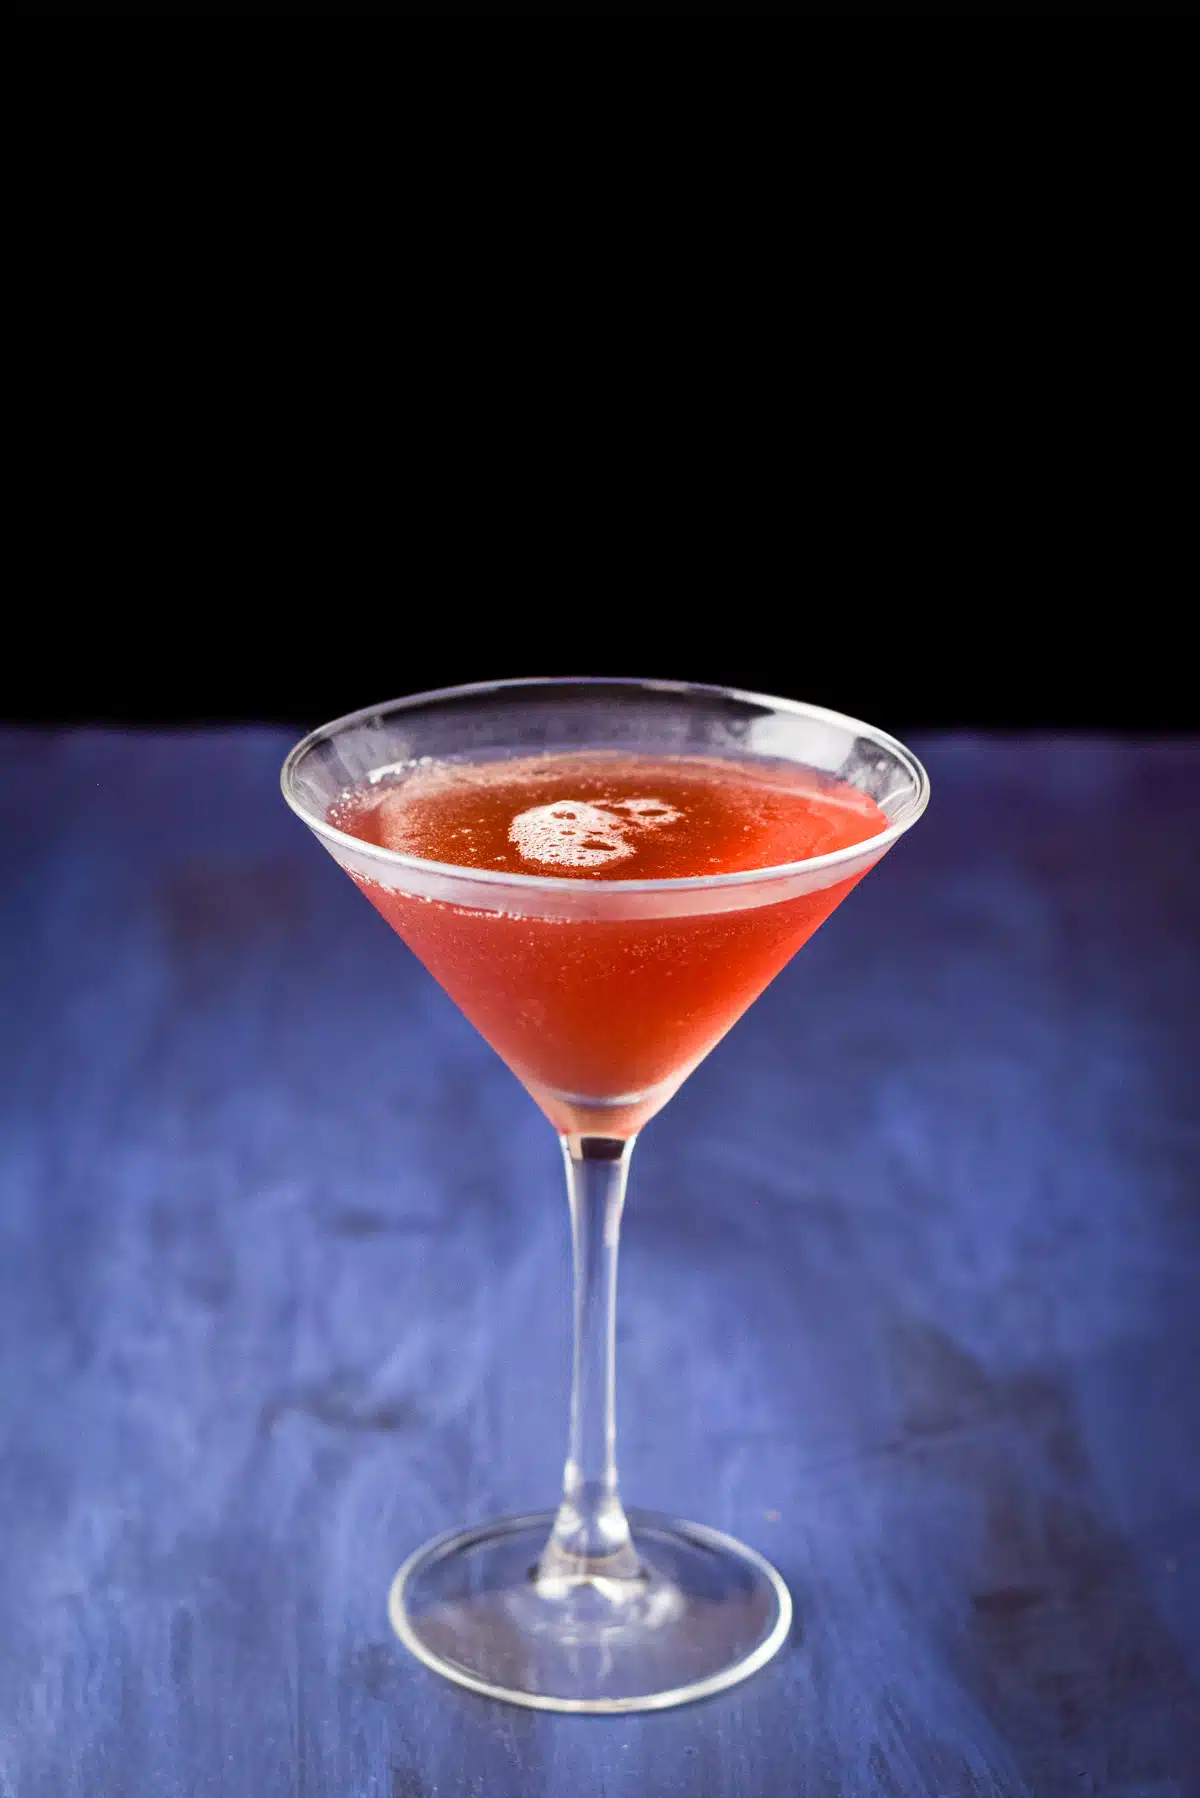 The red drink in a martini glass on a blue table and black background